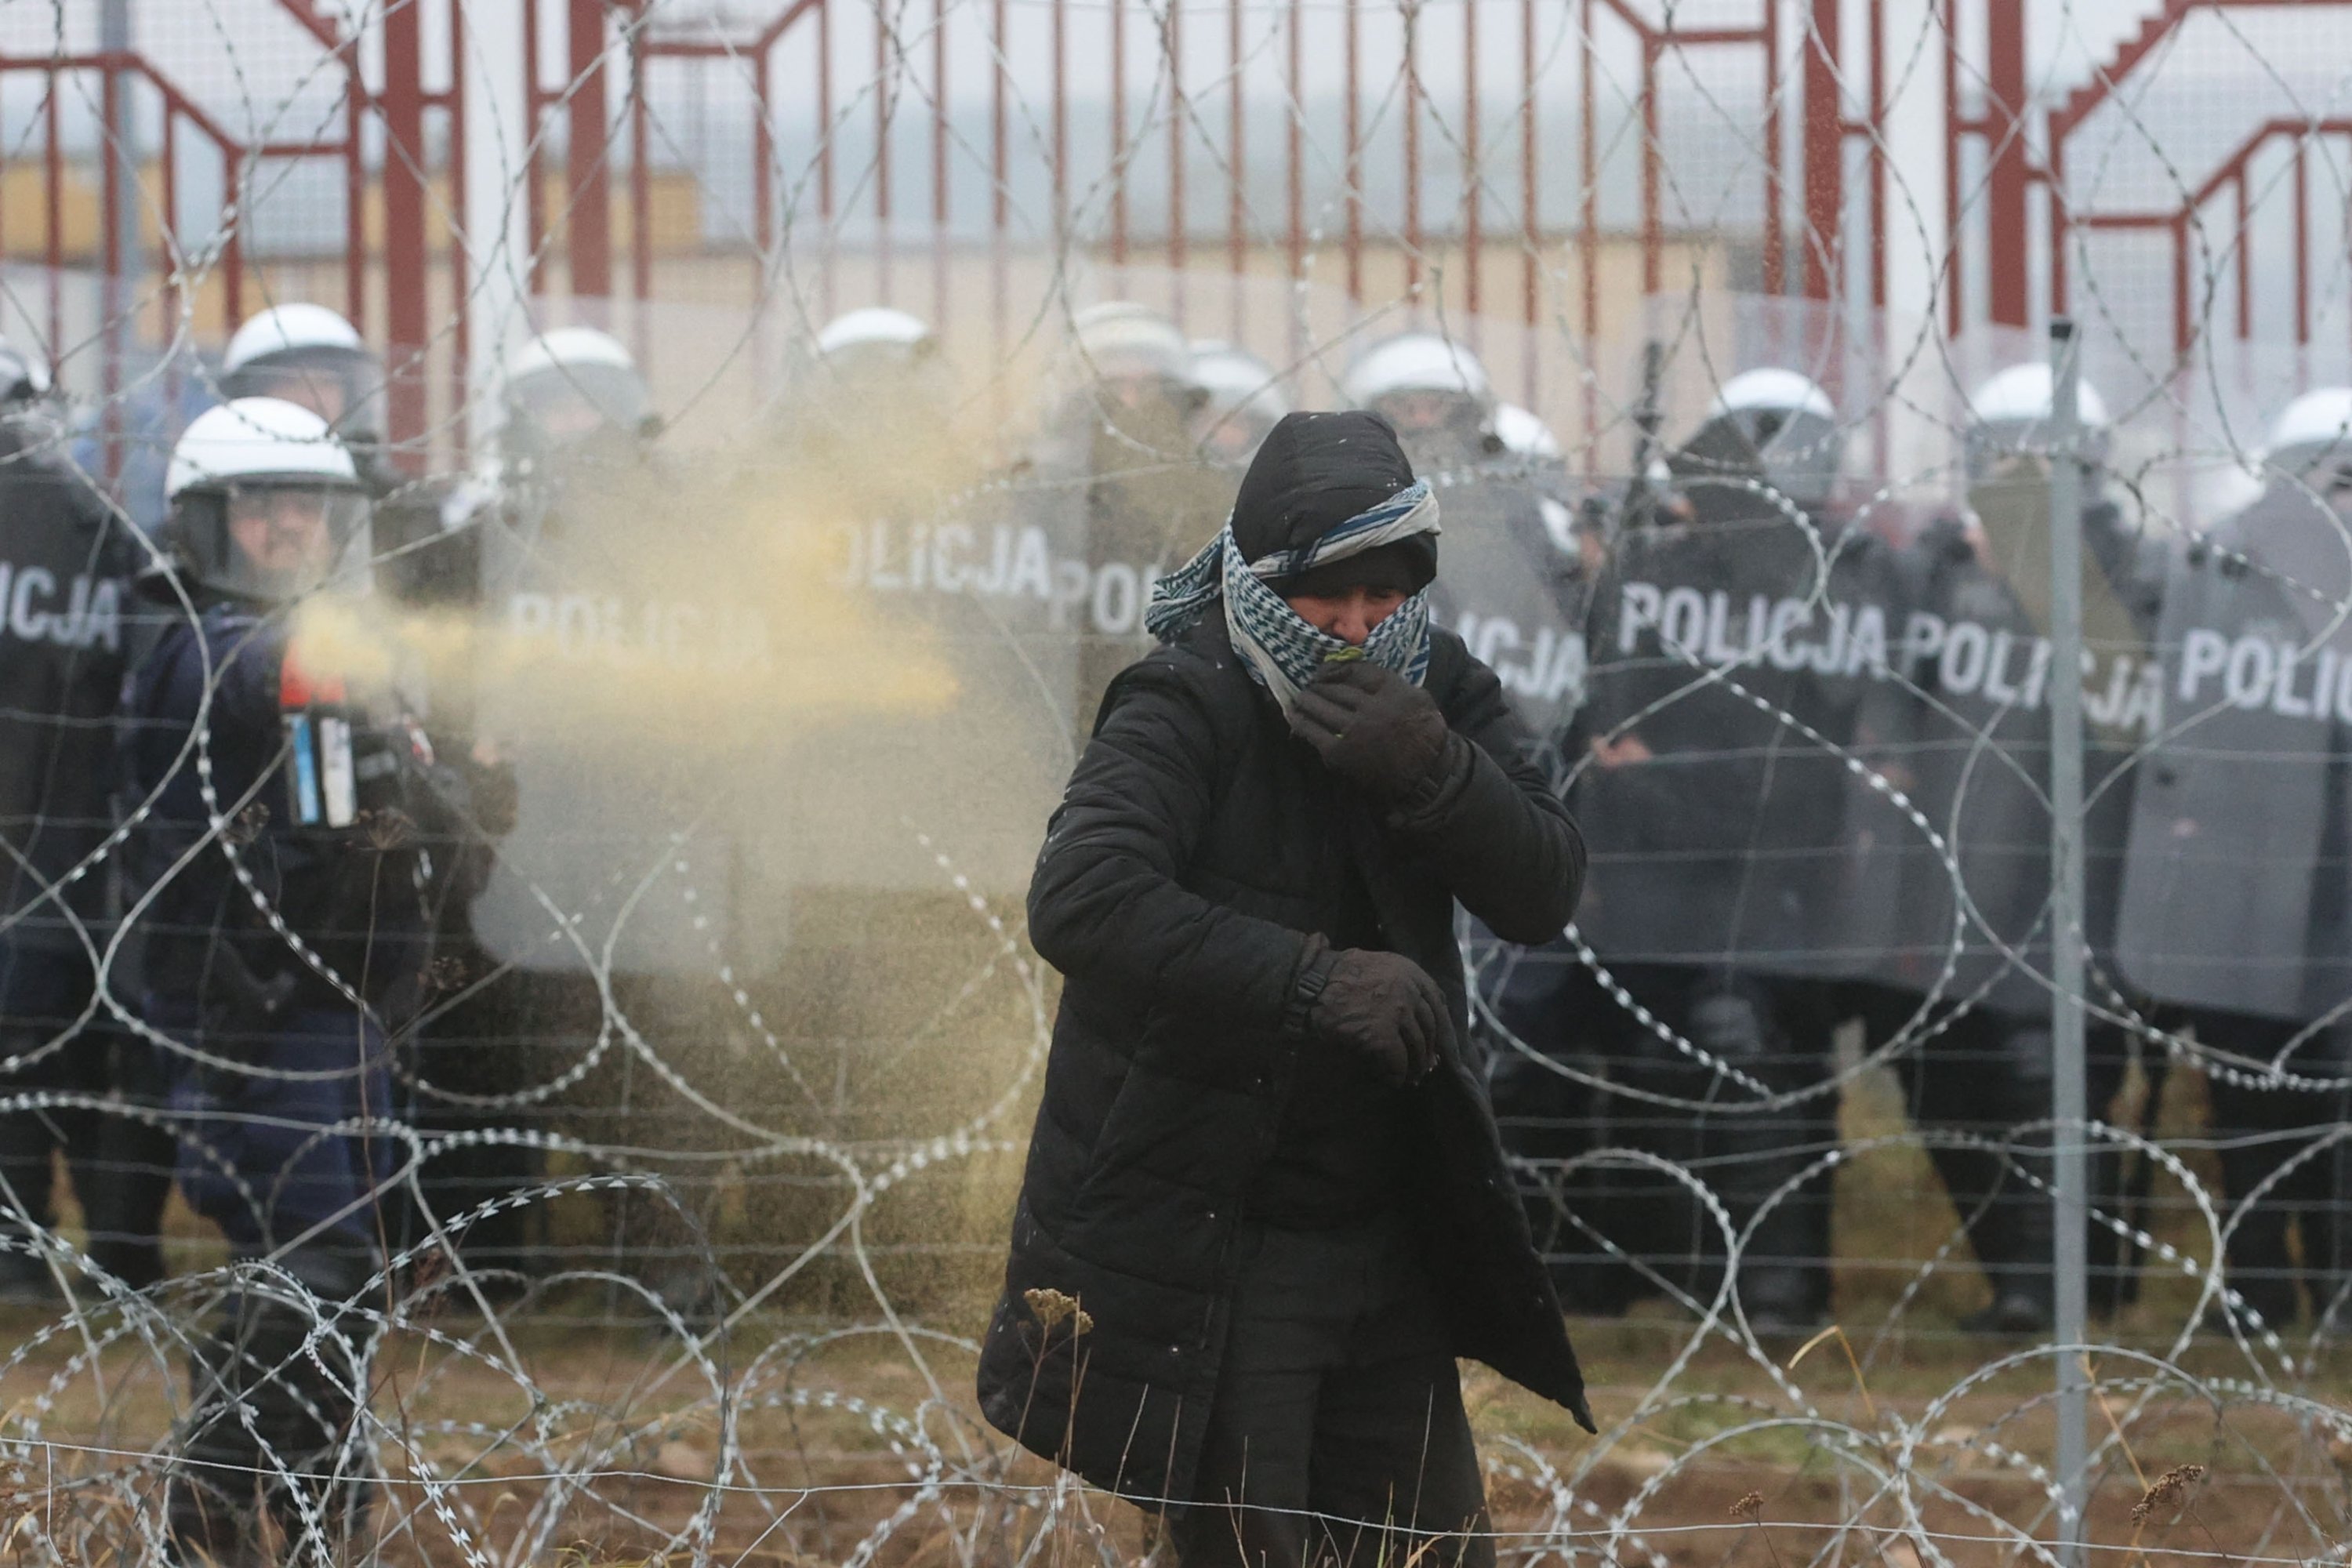 Migrants clash with Polish law enforcement officers as they attempt to cross into Poland at the Bruzgi-Kuznica border crossing on the Belarusian-Polish border, Nov. 16, 2021. (AFP Photo)